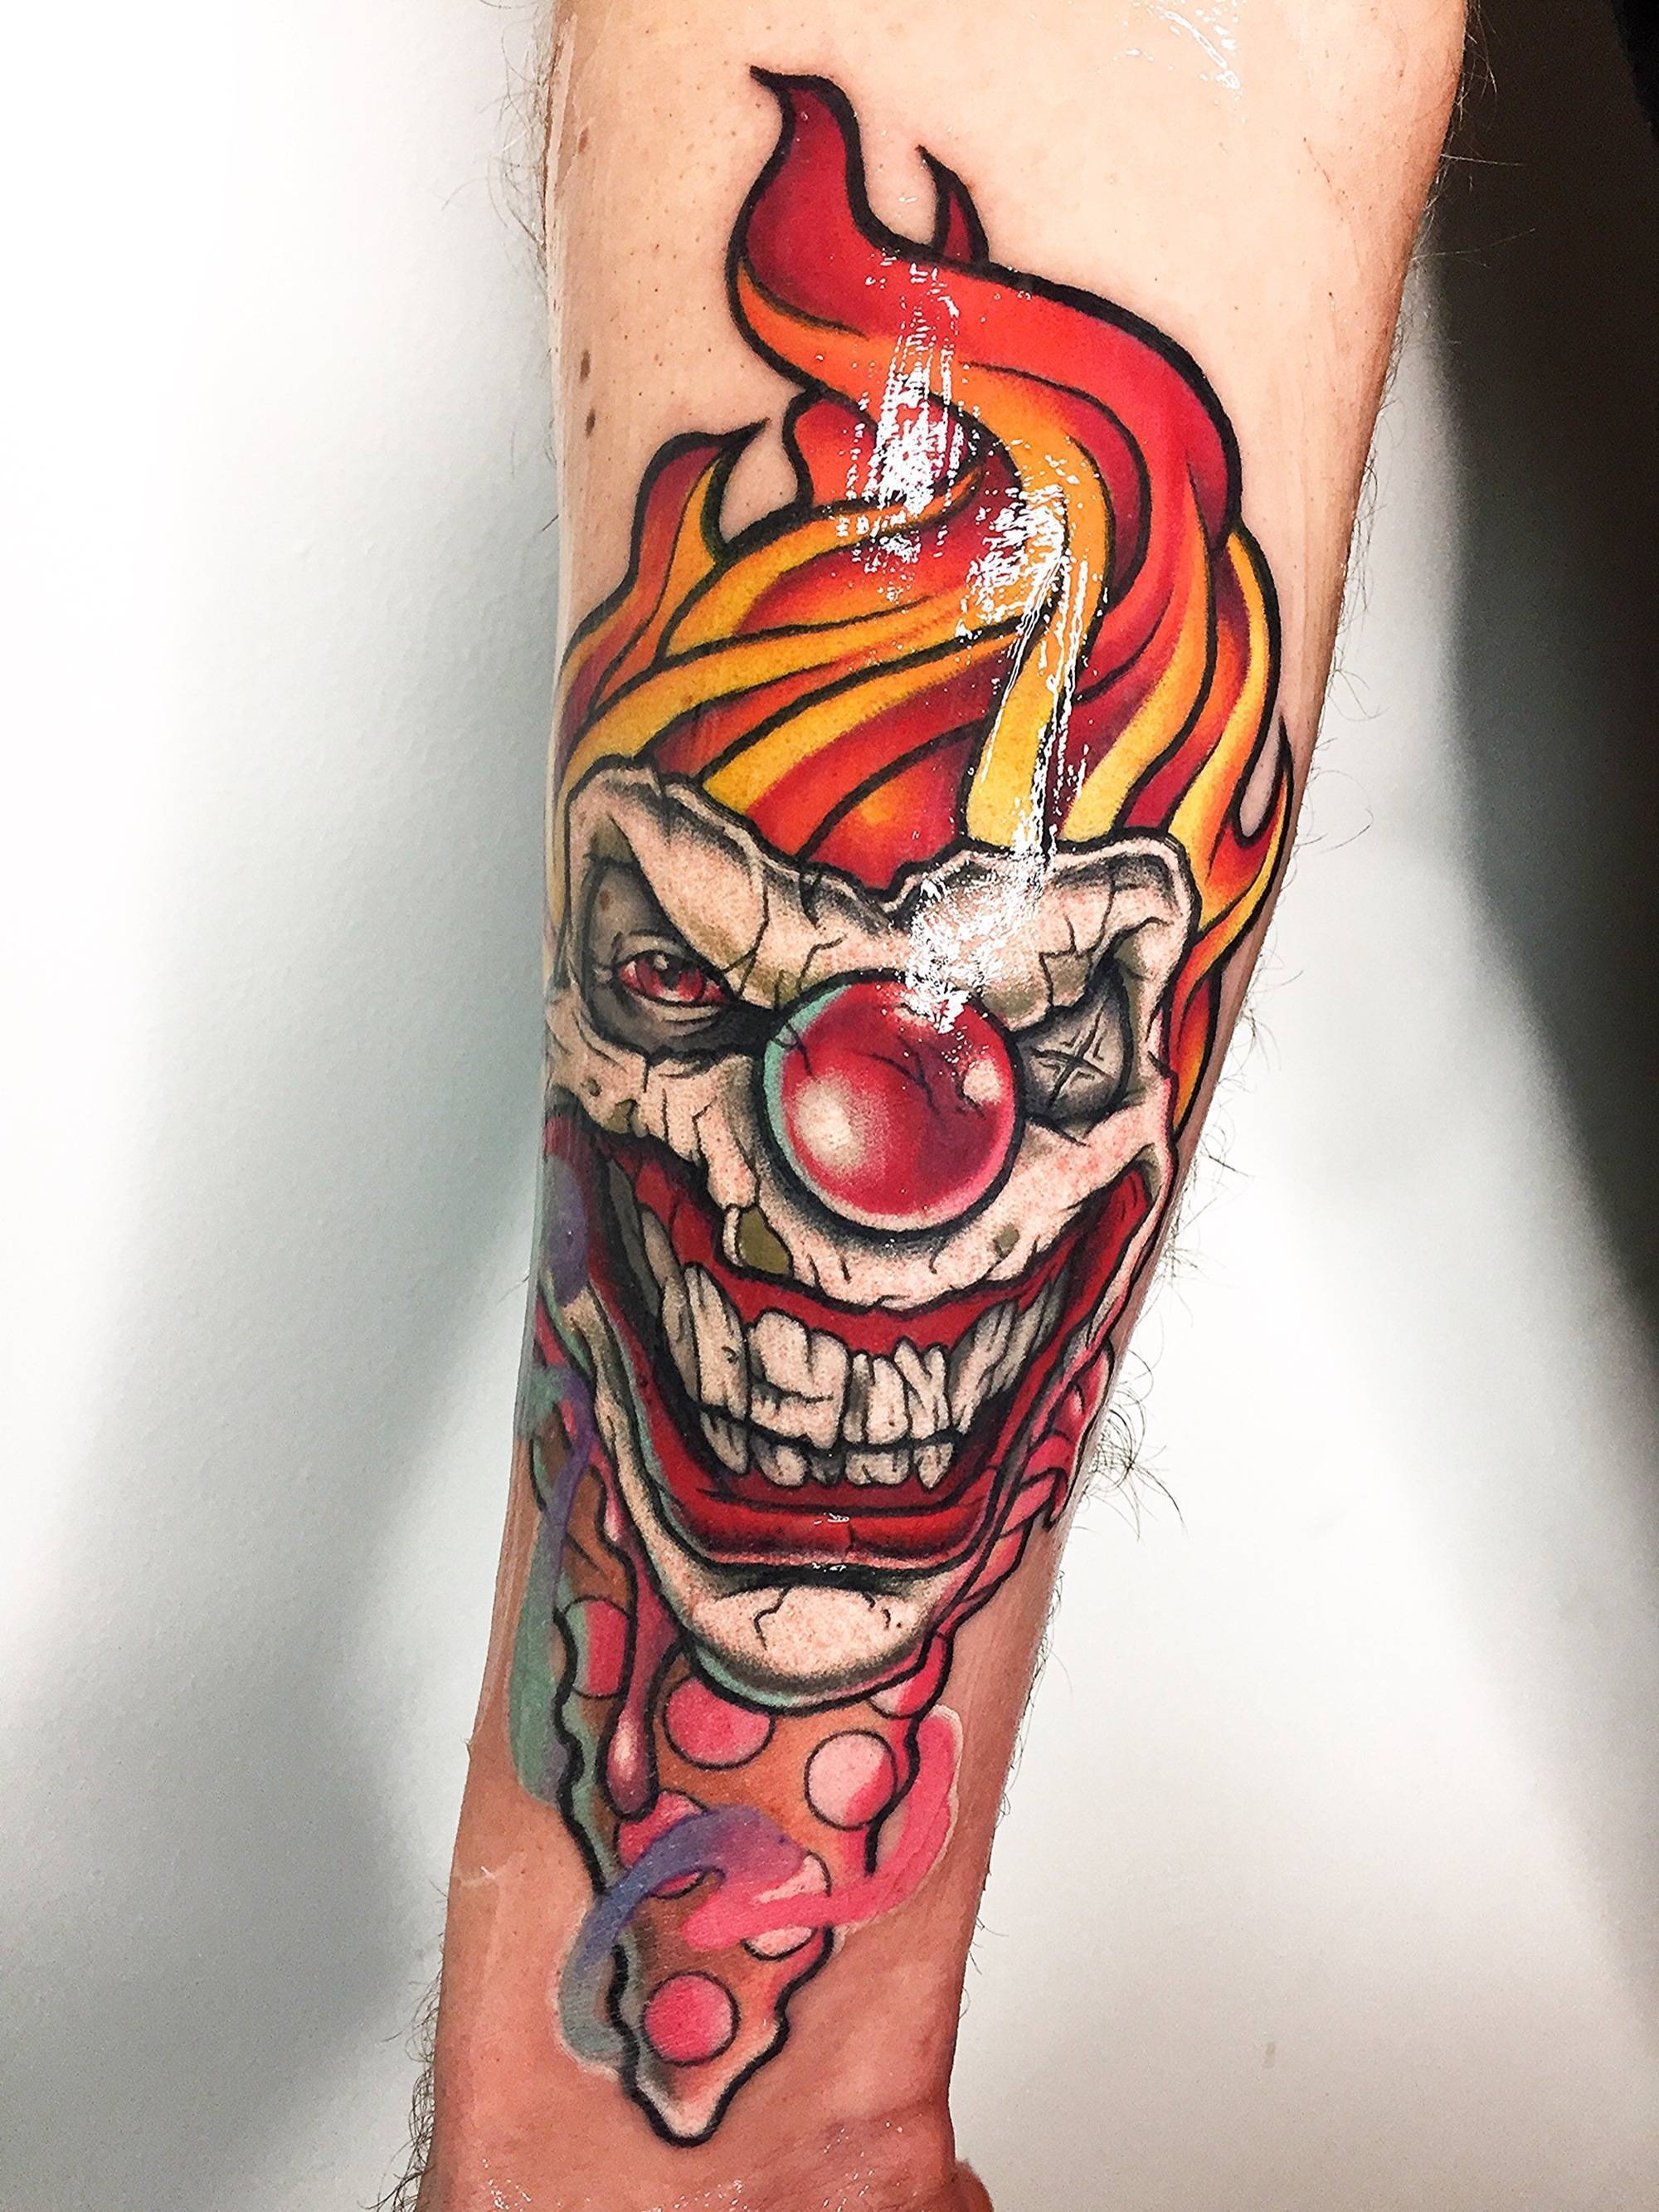 Sweet Tooth tattoo by taylorweaved on DeviantArt